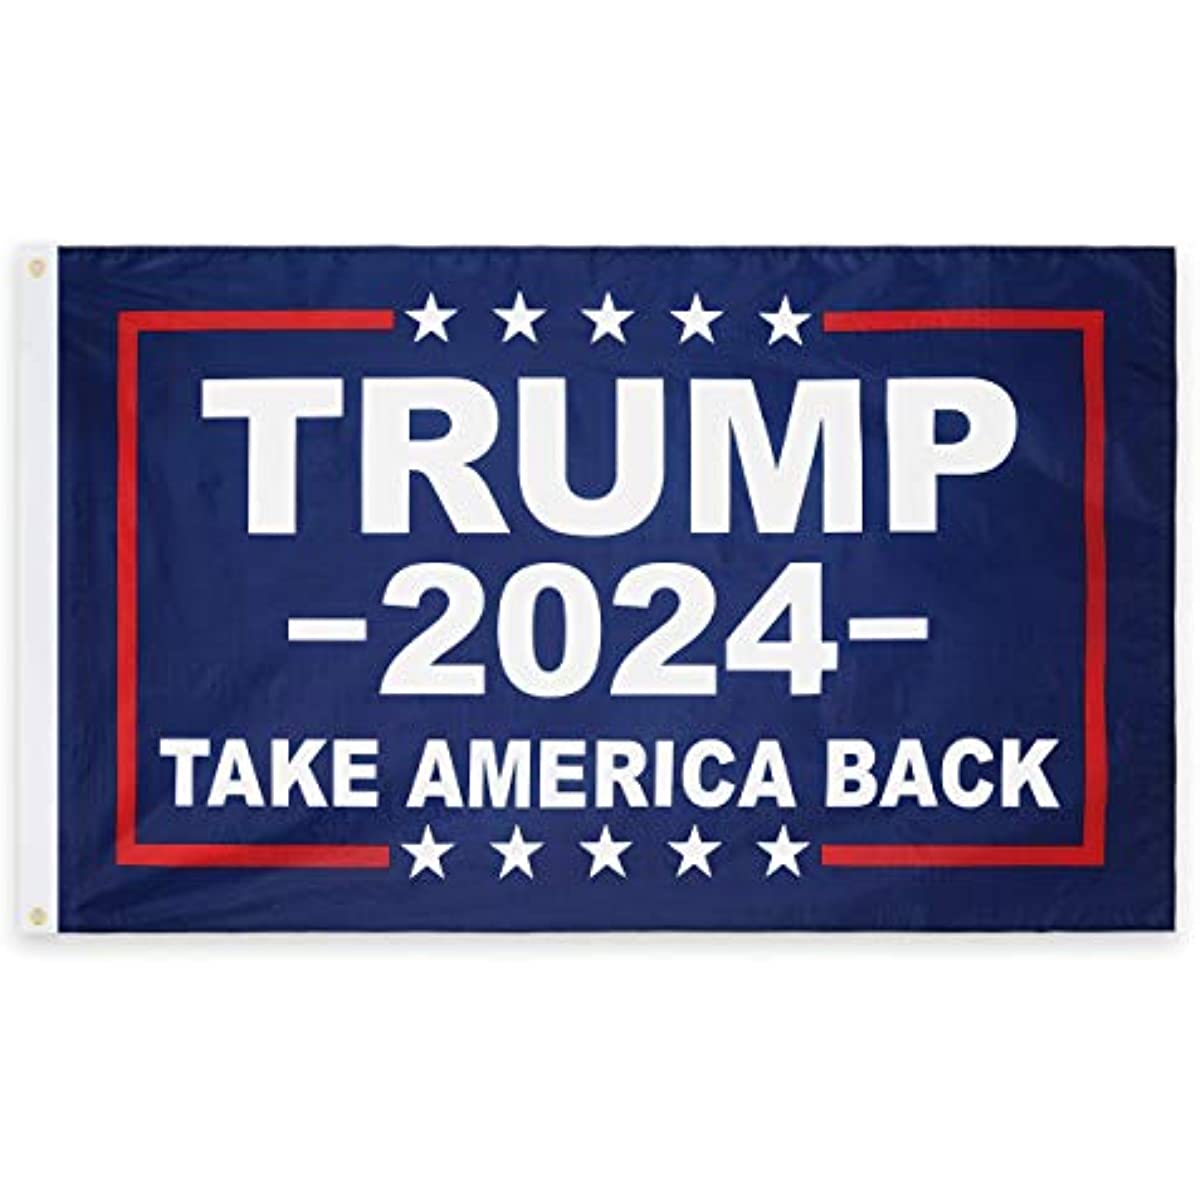 1pc politics flag 3x5ft with grommets trump 2024 take america back slogan flag presidential election flag american flag home decor room decor outdoor decor for party decor anniversary party favor activities decoration details 0